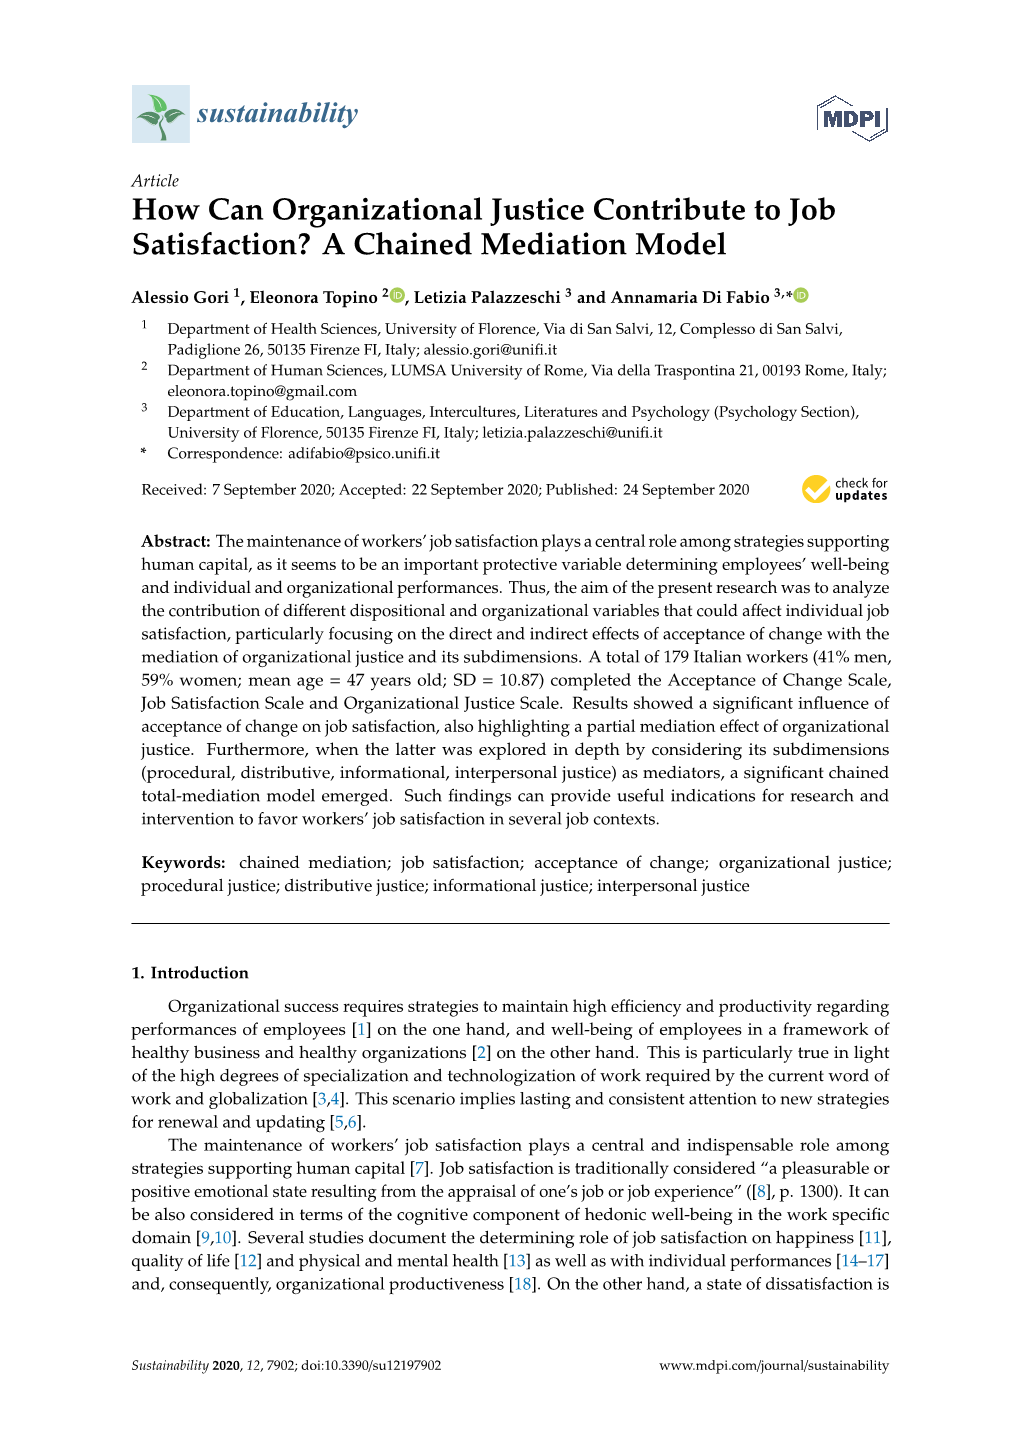 How Can Organizational Justice Contribute to Job Satisfaction? a Chained Mediation Model